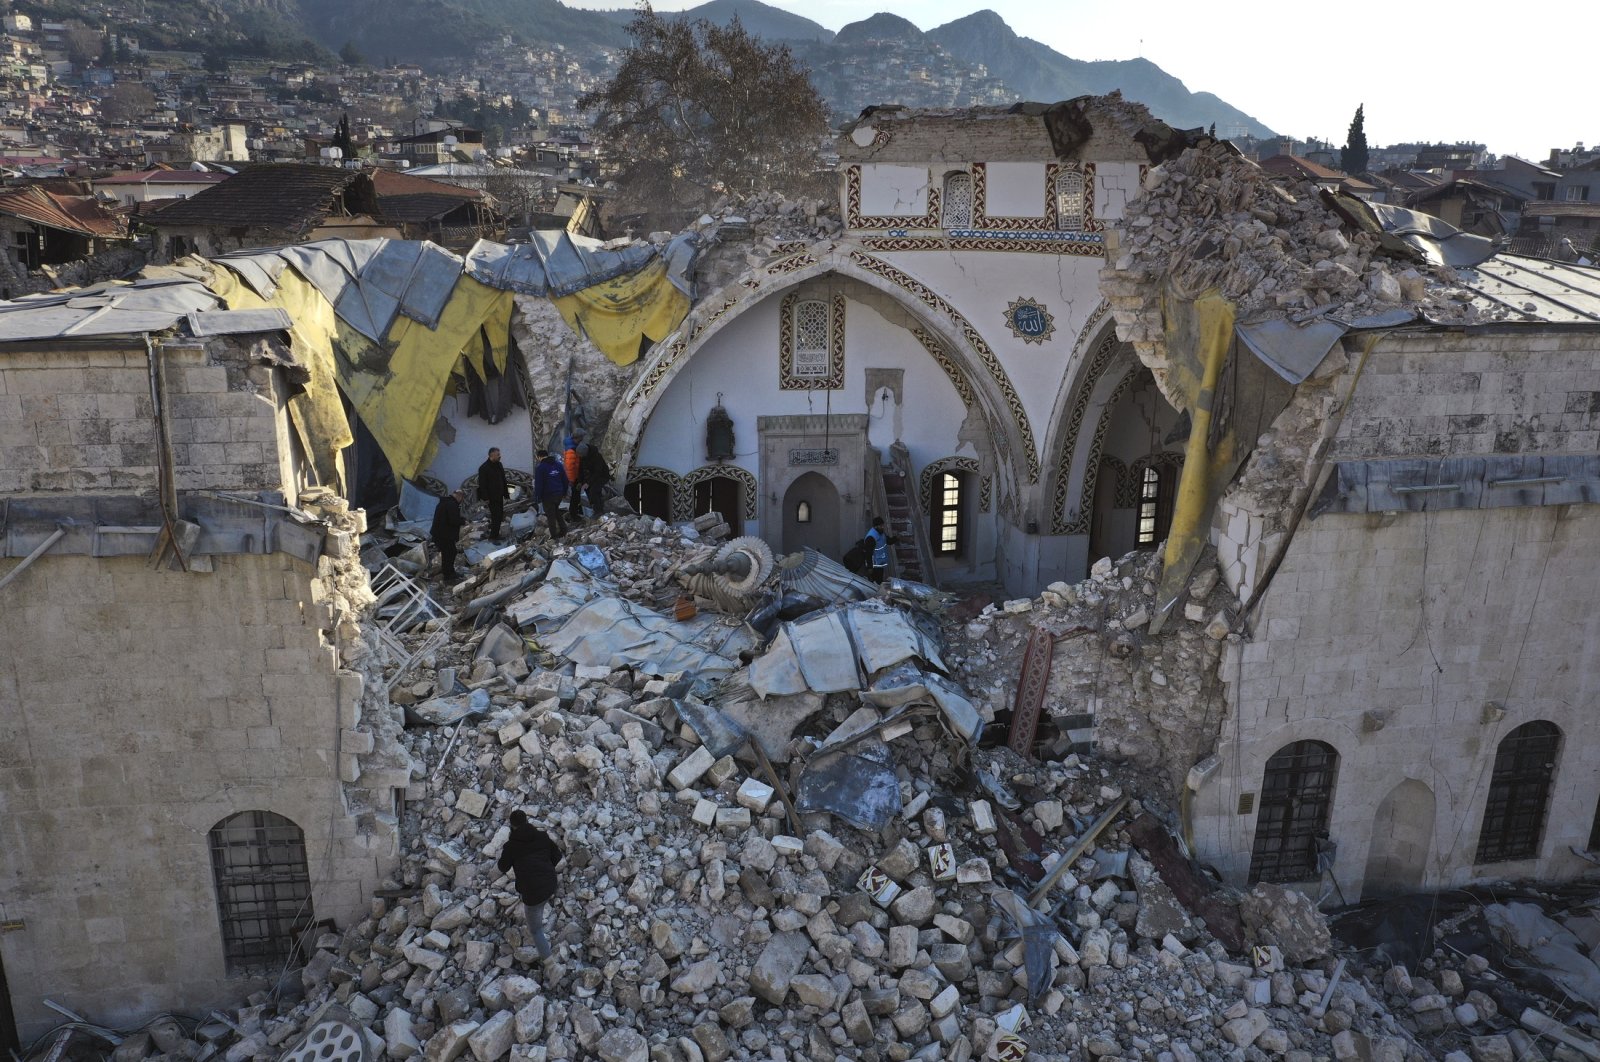 Turkish citizens check the historic Habib Najjar mosque which destroyed during the devastated earthquake, in the old city of Antakya, Türkiye, Feb. 11, 2023. (AP Photo)